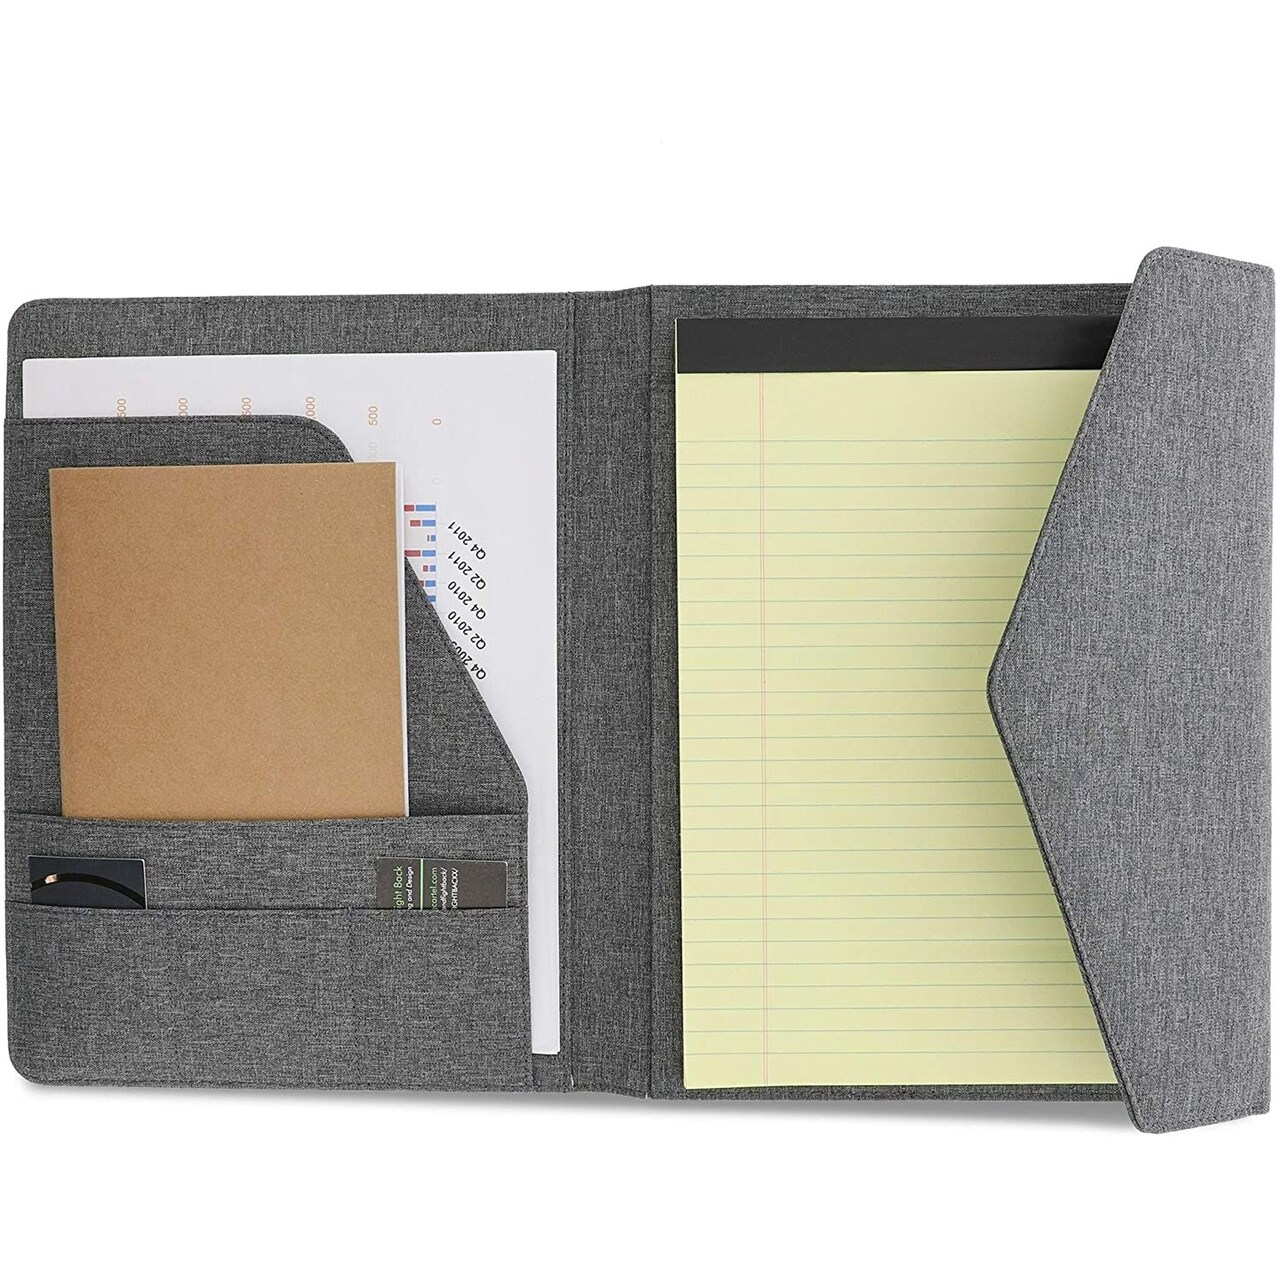 Professional Legal Notepad Portfolio, Grey Folio Notebook for Business and Work Organizer (12.5 x 10 In)